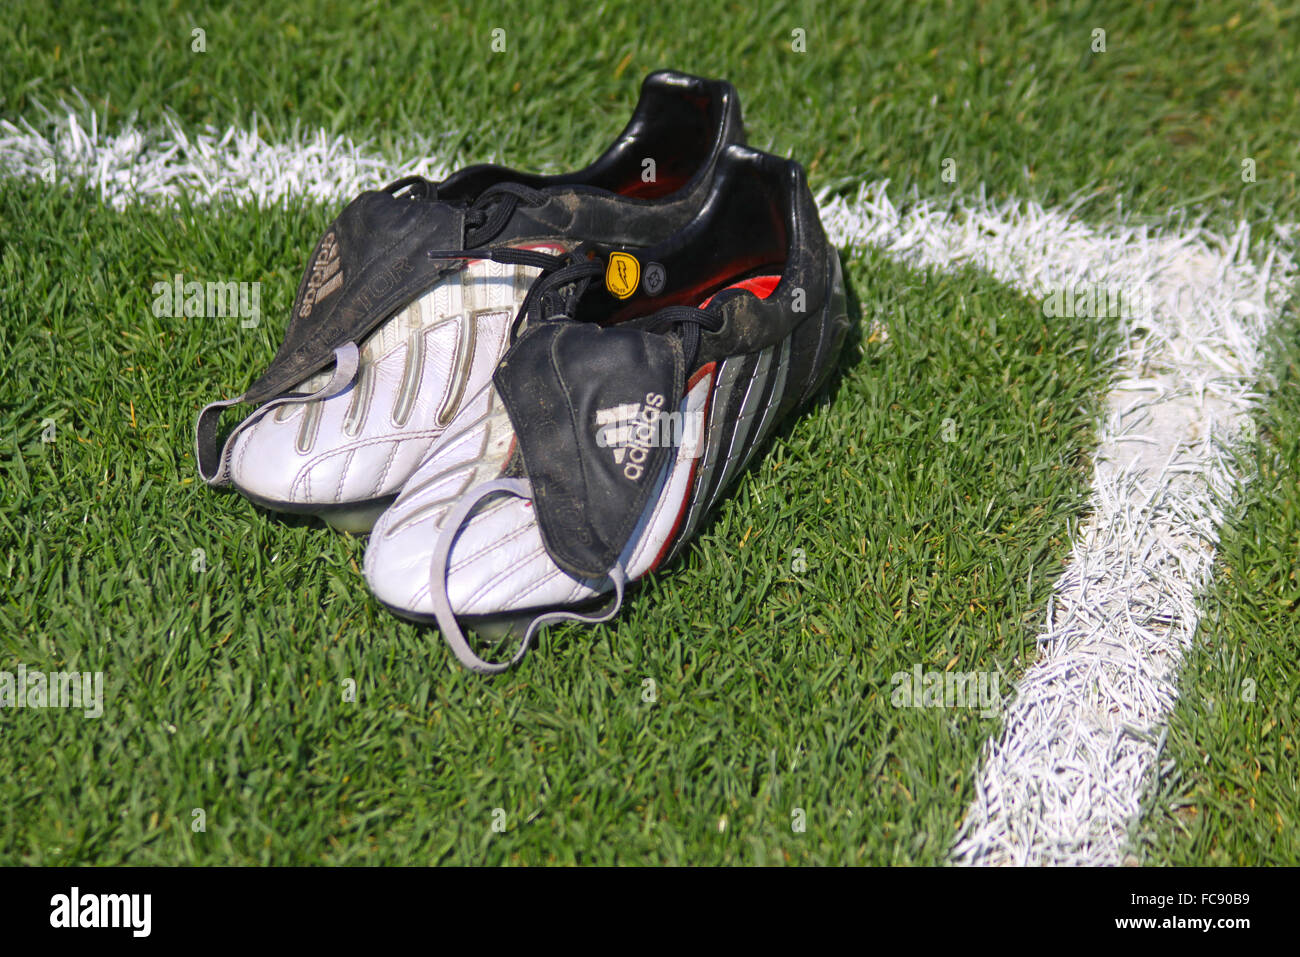 Adidas Football Boots High Resolution Stock Photography and Images - Alamy